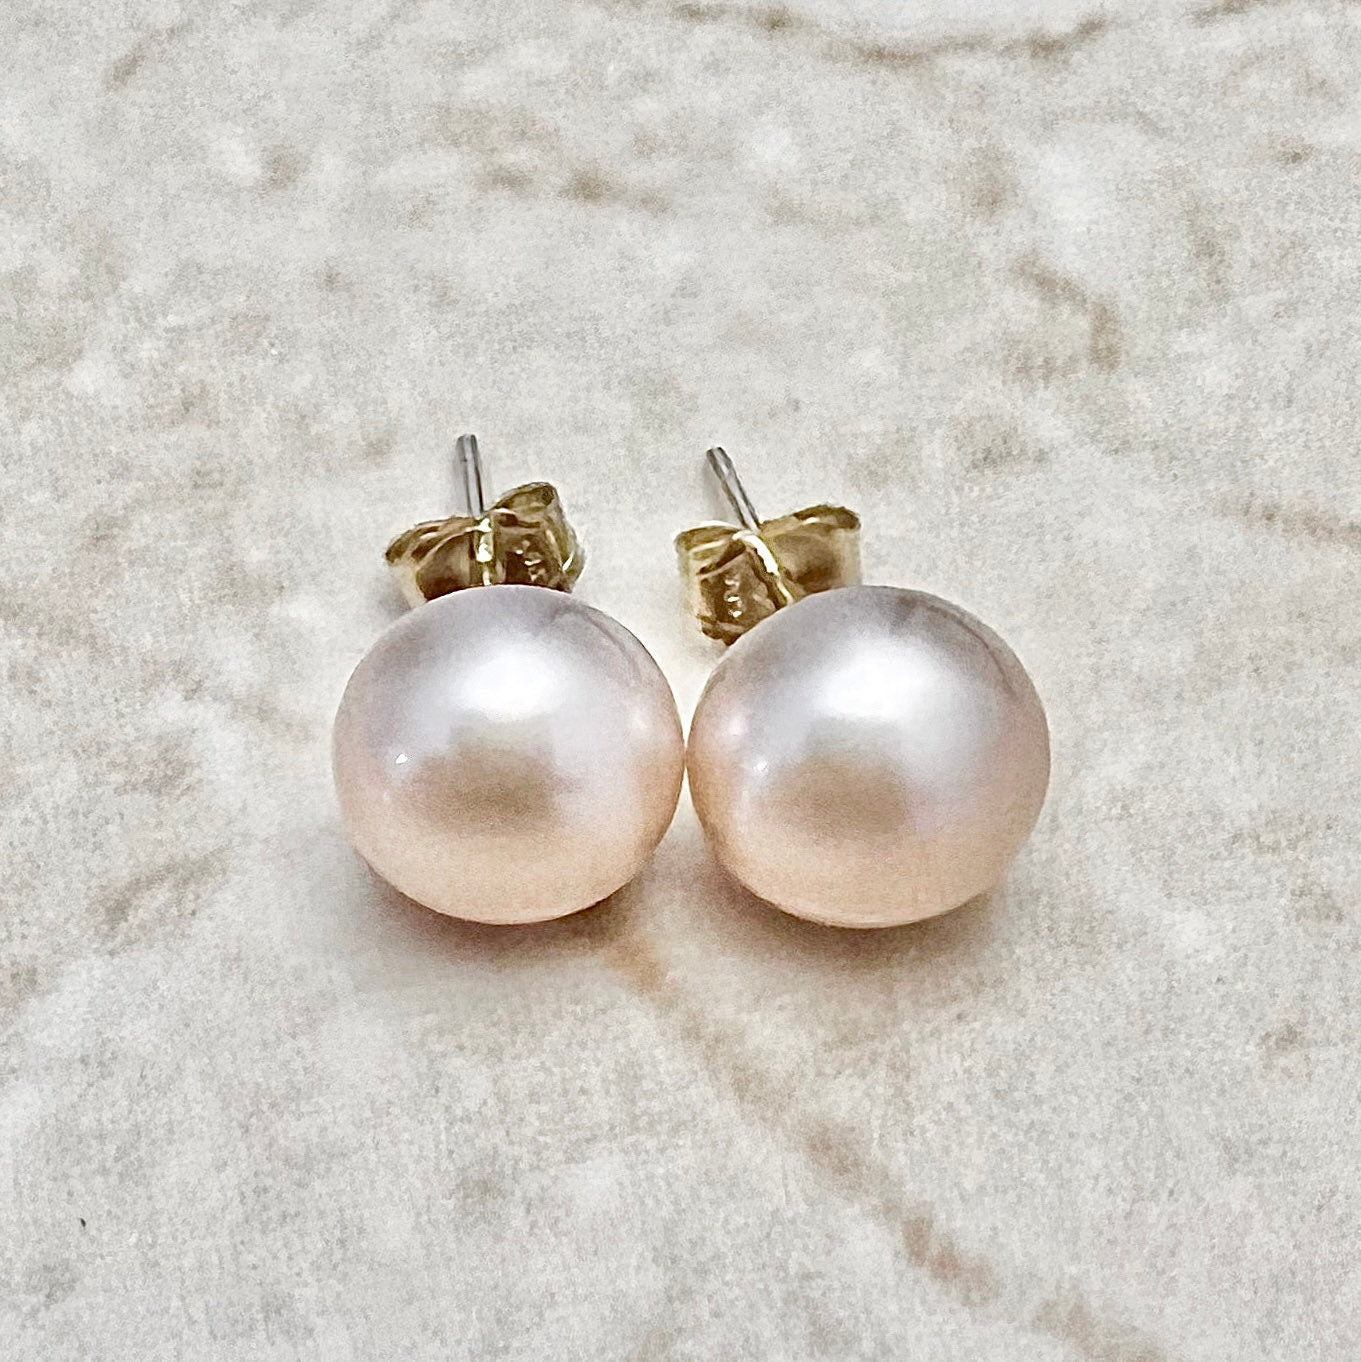 Classic Peach Pearl Stud Earrings In 14 Karat Yellow Gold - Genuine Freshwater Button Pearls - Best Birthday Gift For Her - June Birthstone